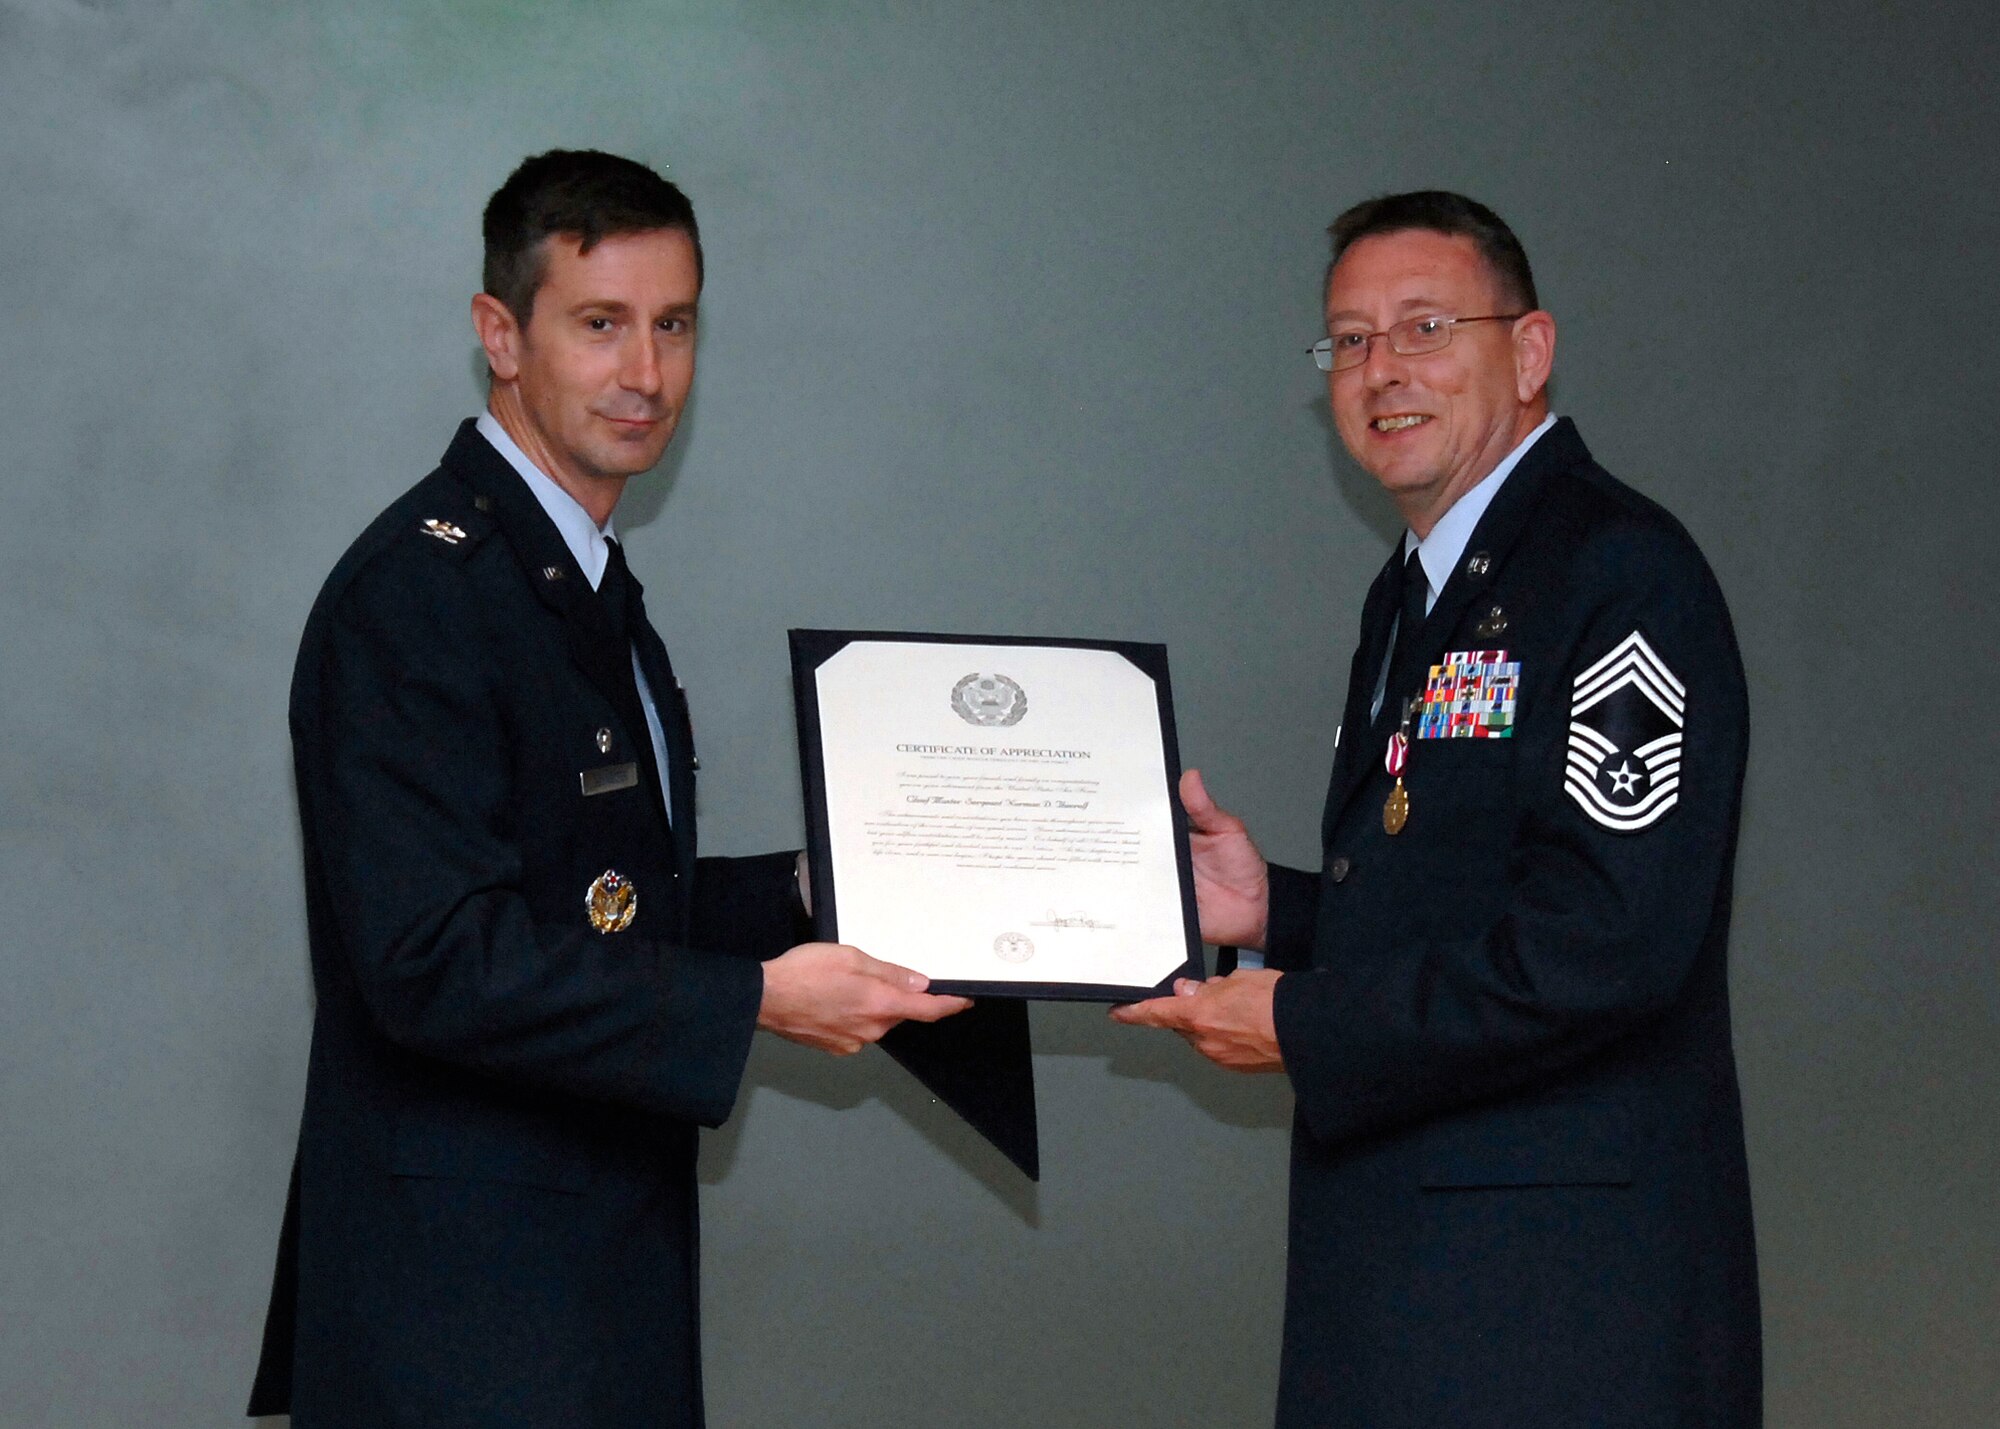 Col. Kevin Schneider, 80th Flying Training Wing commander, presents Chief Master Sgt. Norman Thierolf with his a certificate of appreciation during the chief’s retirement ceremony, April 16, 2010. Chief Thierolf retired after serving 30 years in the Air Force. (U.S. Air Force Photo/Michael Litteken)